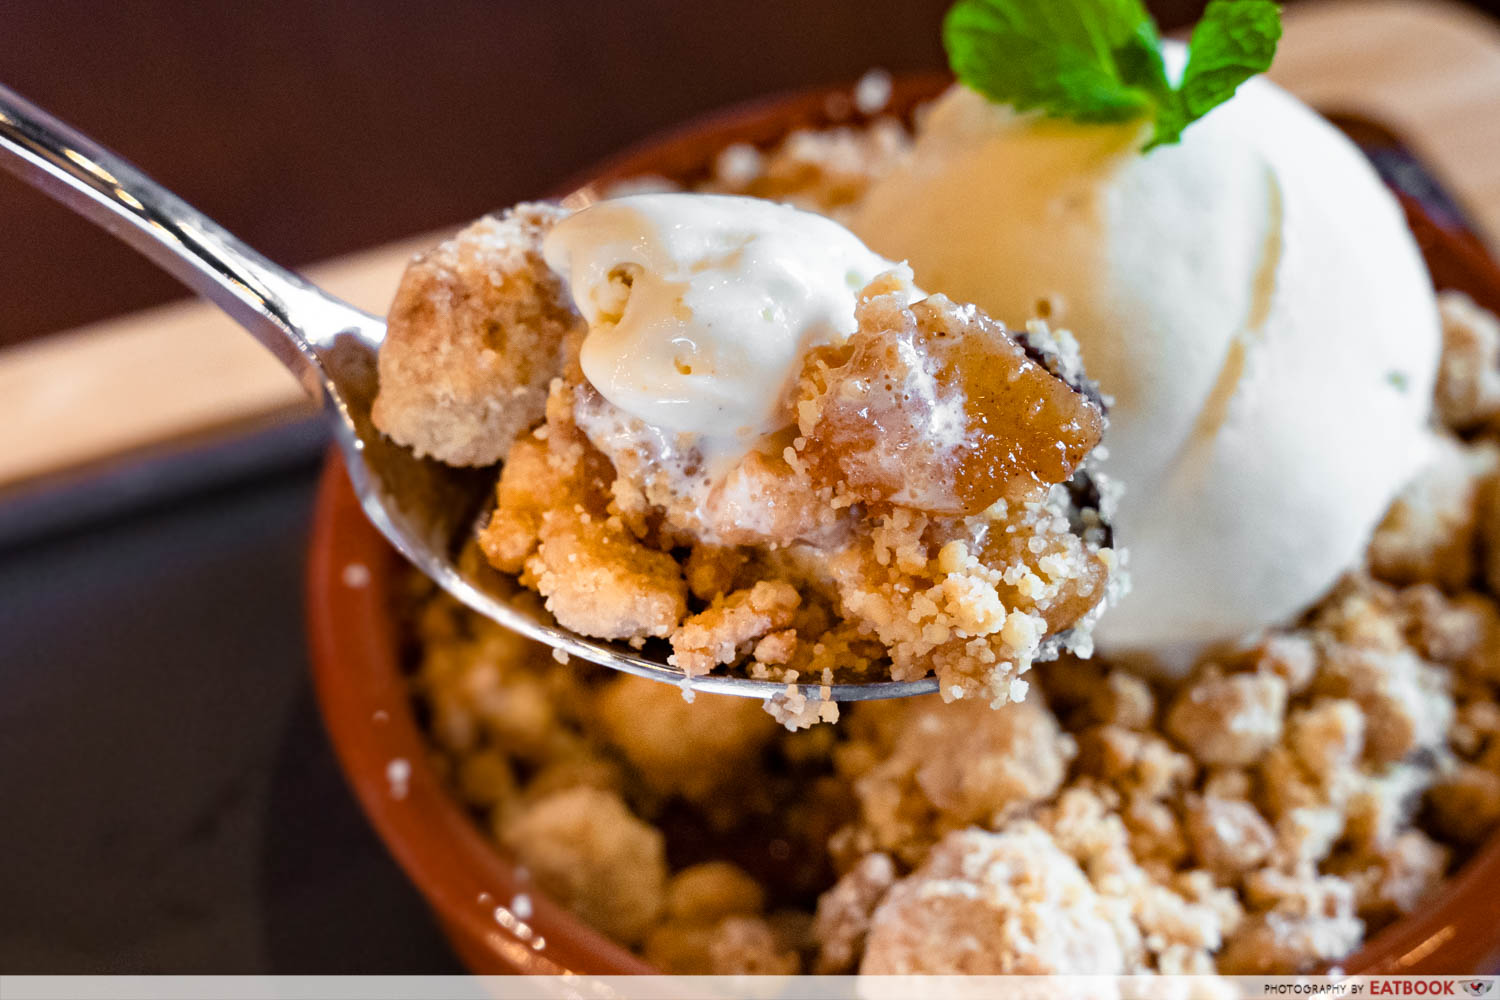 wine connection - apple crumble